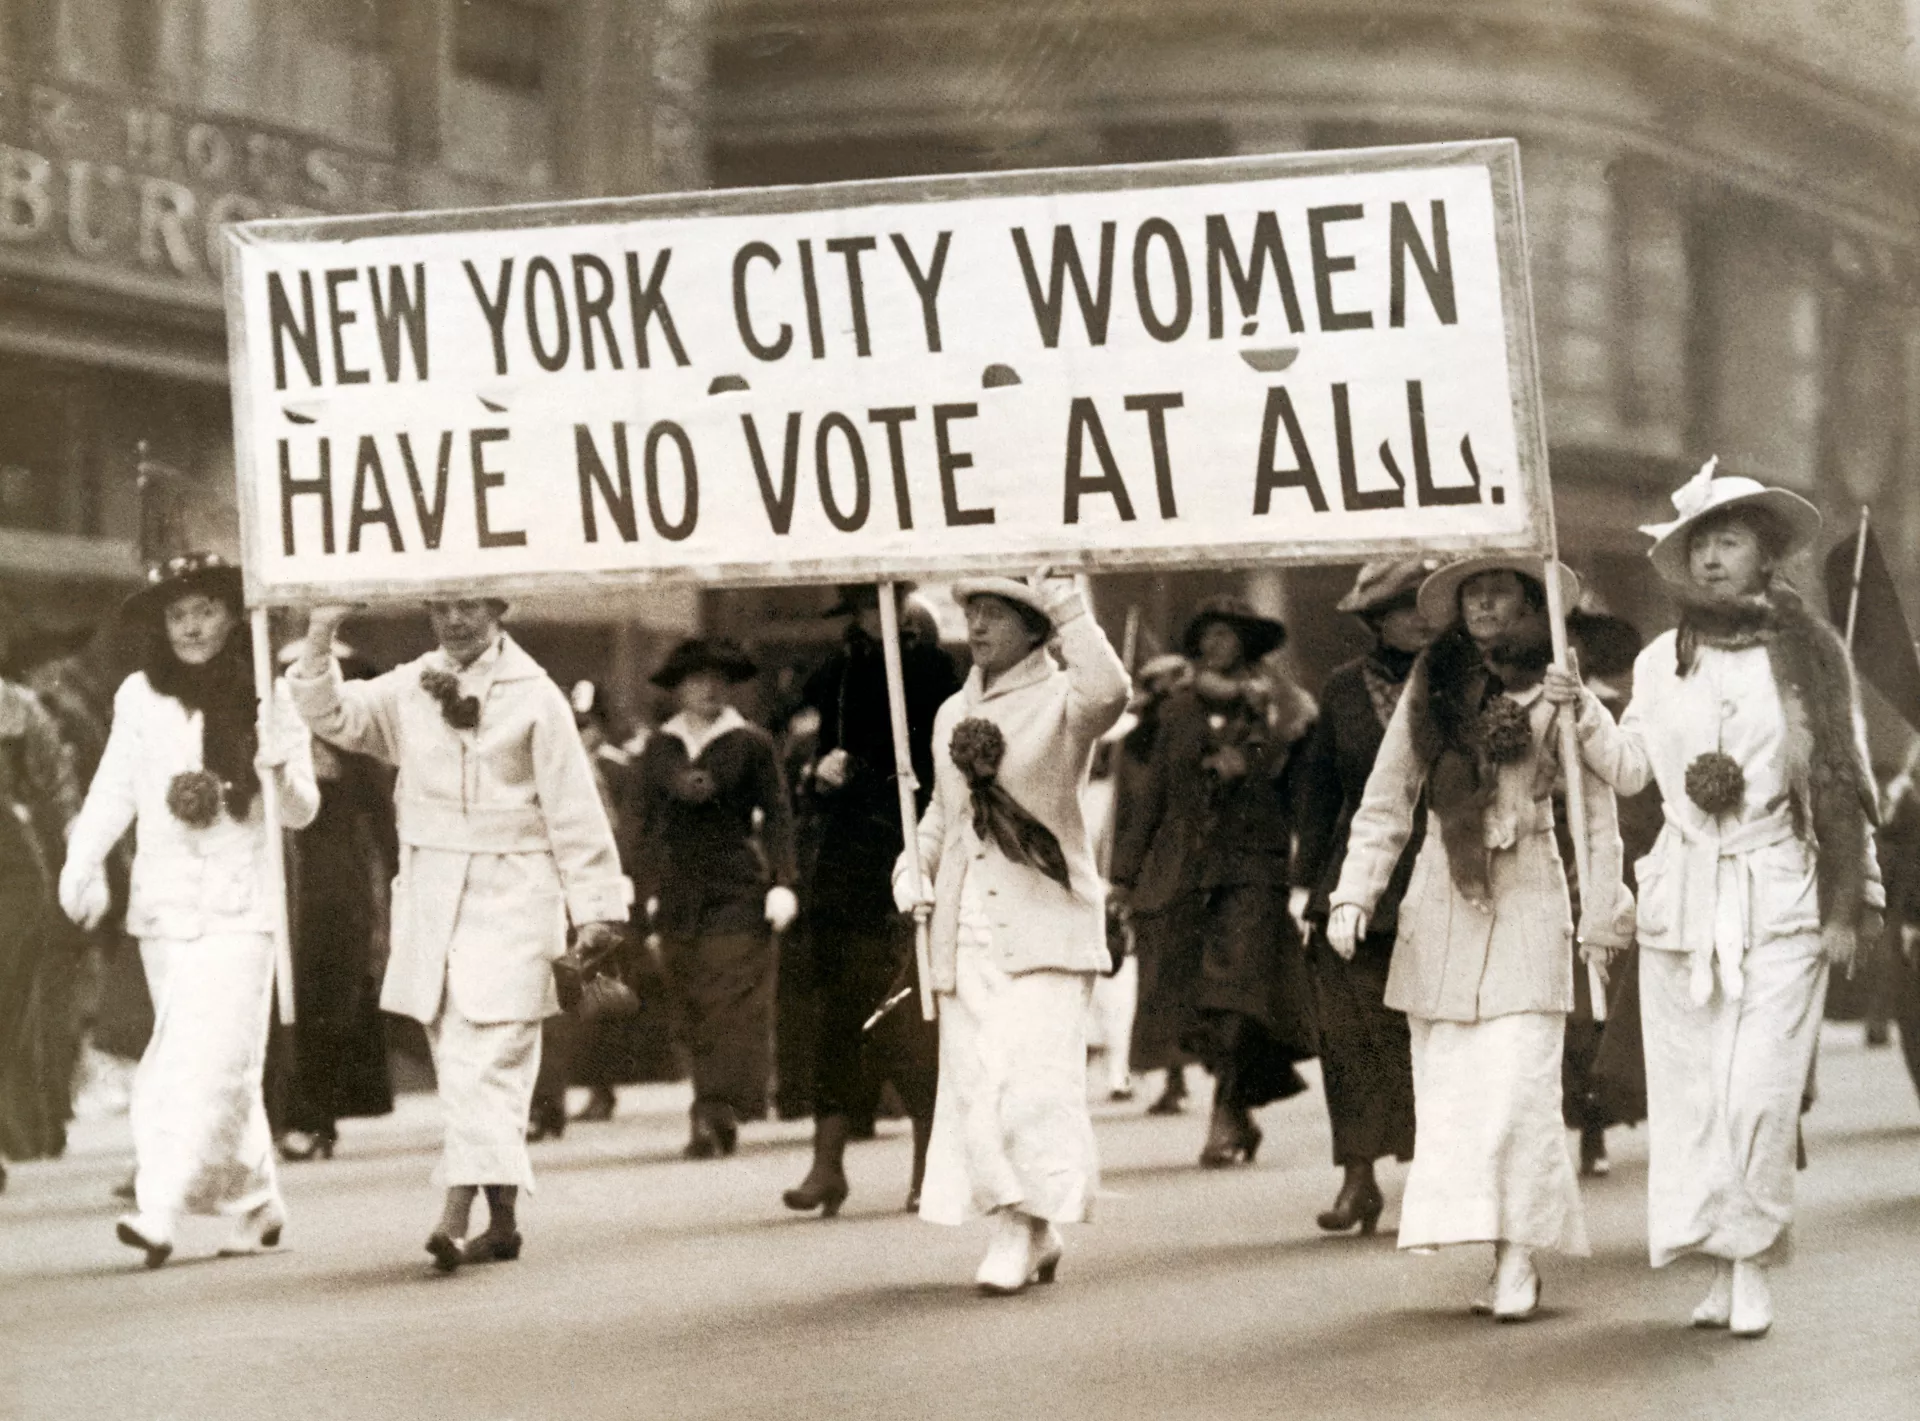 A woman's journey through suffrage in America is a long and tough one, beginning in 1848.